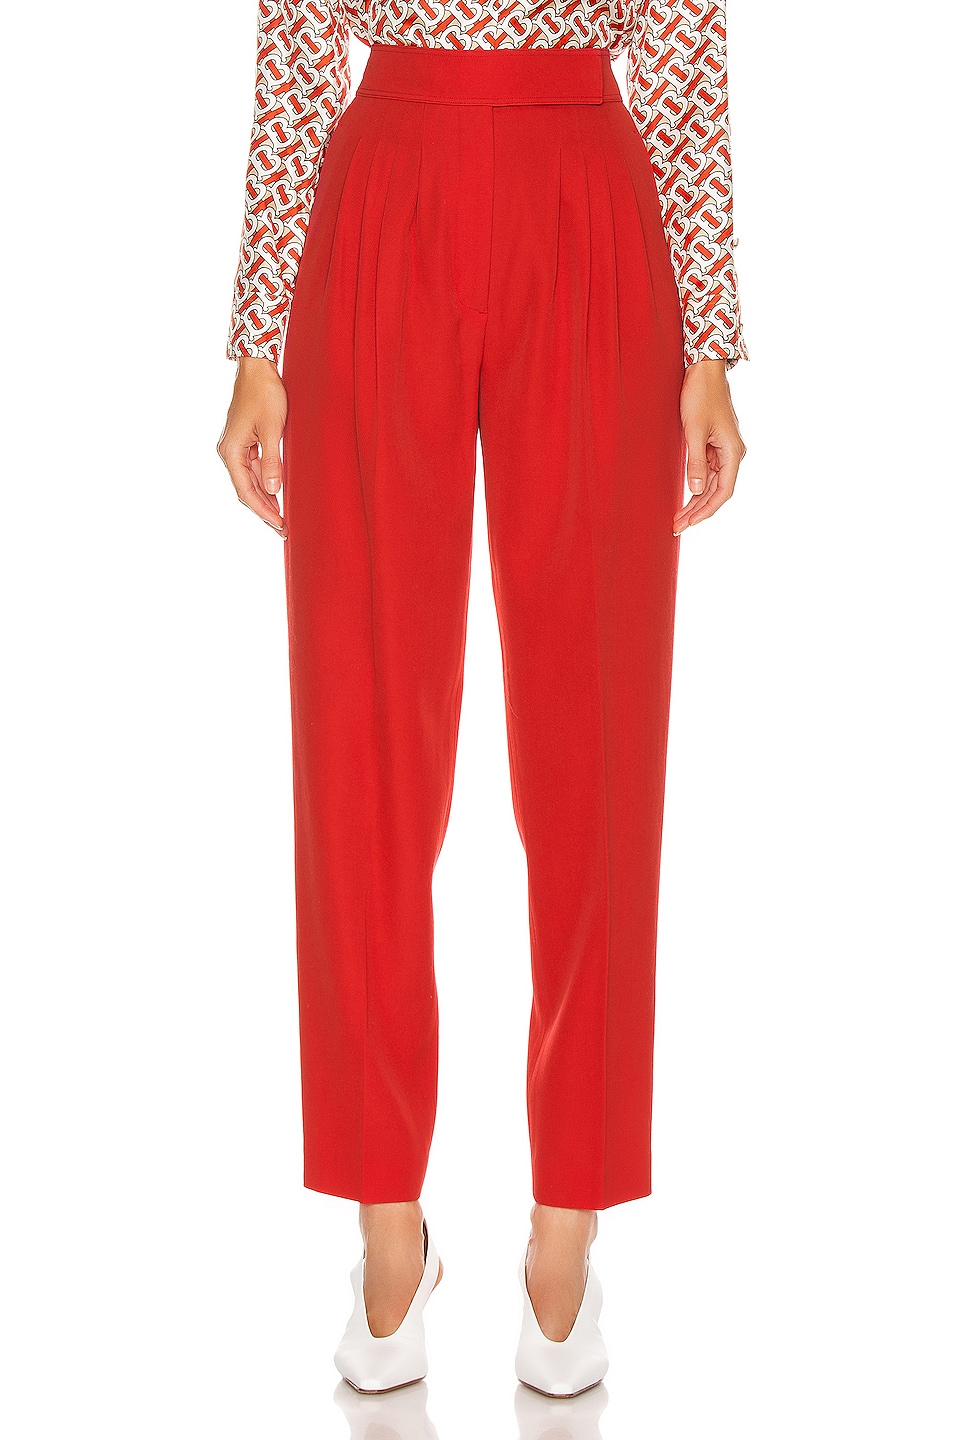 Image 1 of Burberry Marleigh Pant in Bright Red